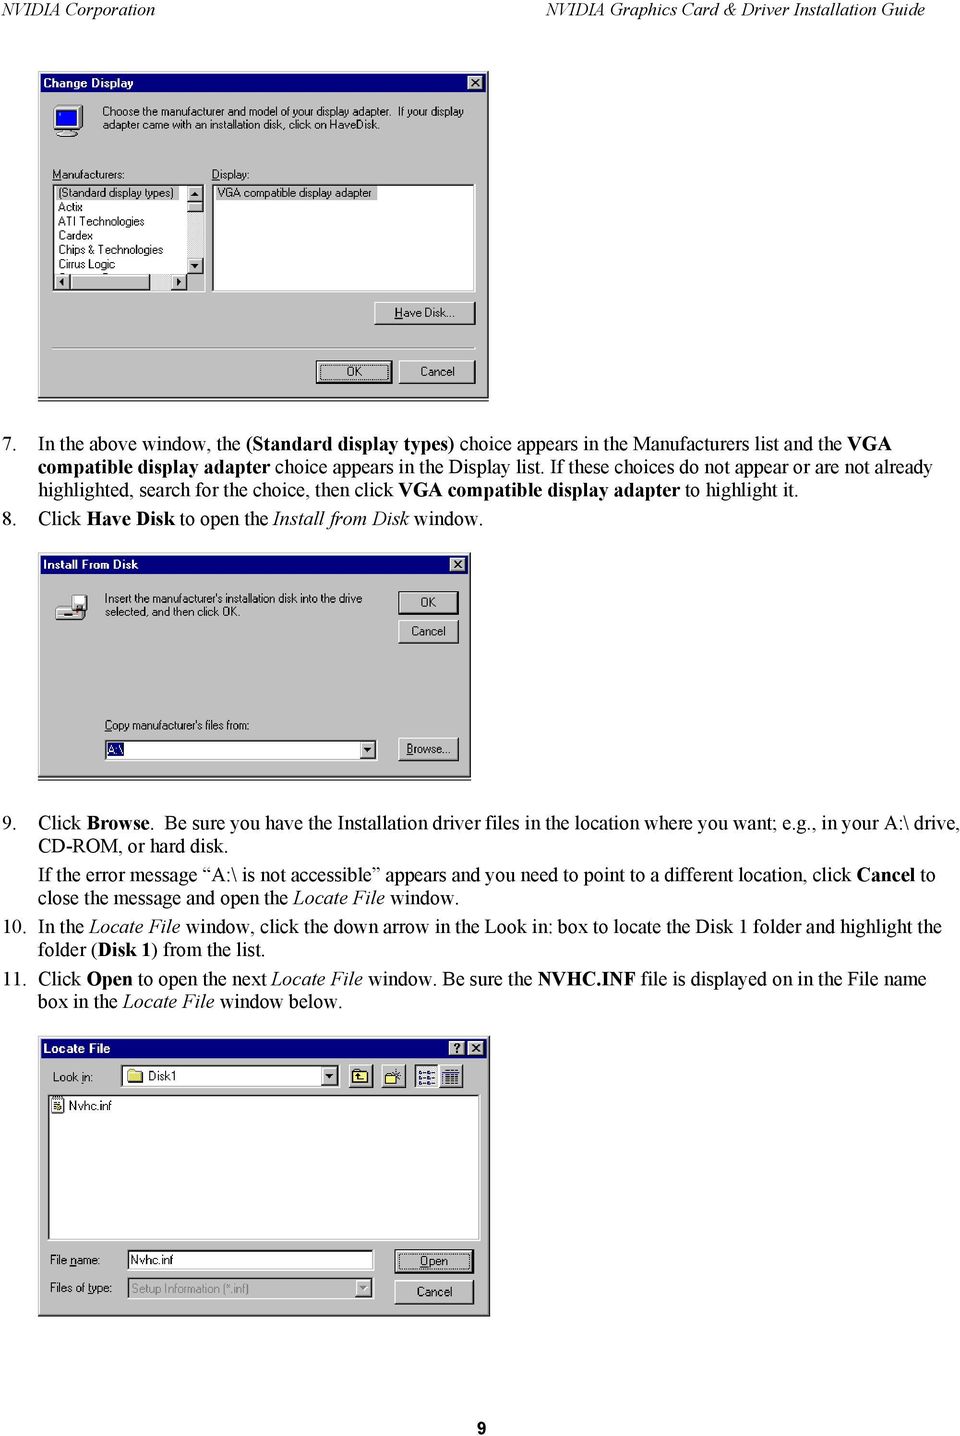 Click Have Disk to open the Install from Disk window. 9. Click Browse. Be sure you have the Installation driver files in the location where you want; e.g., in your A:\ drive, CD-ROM, or hard disk.